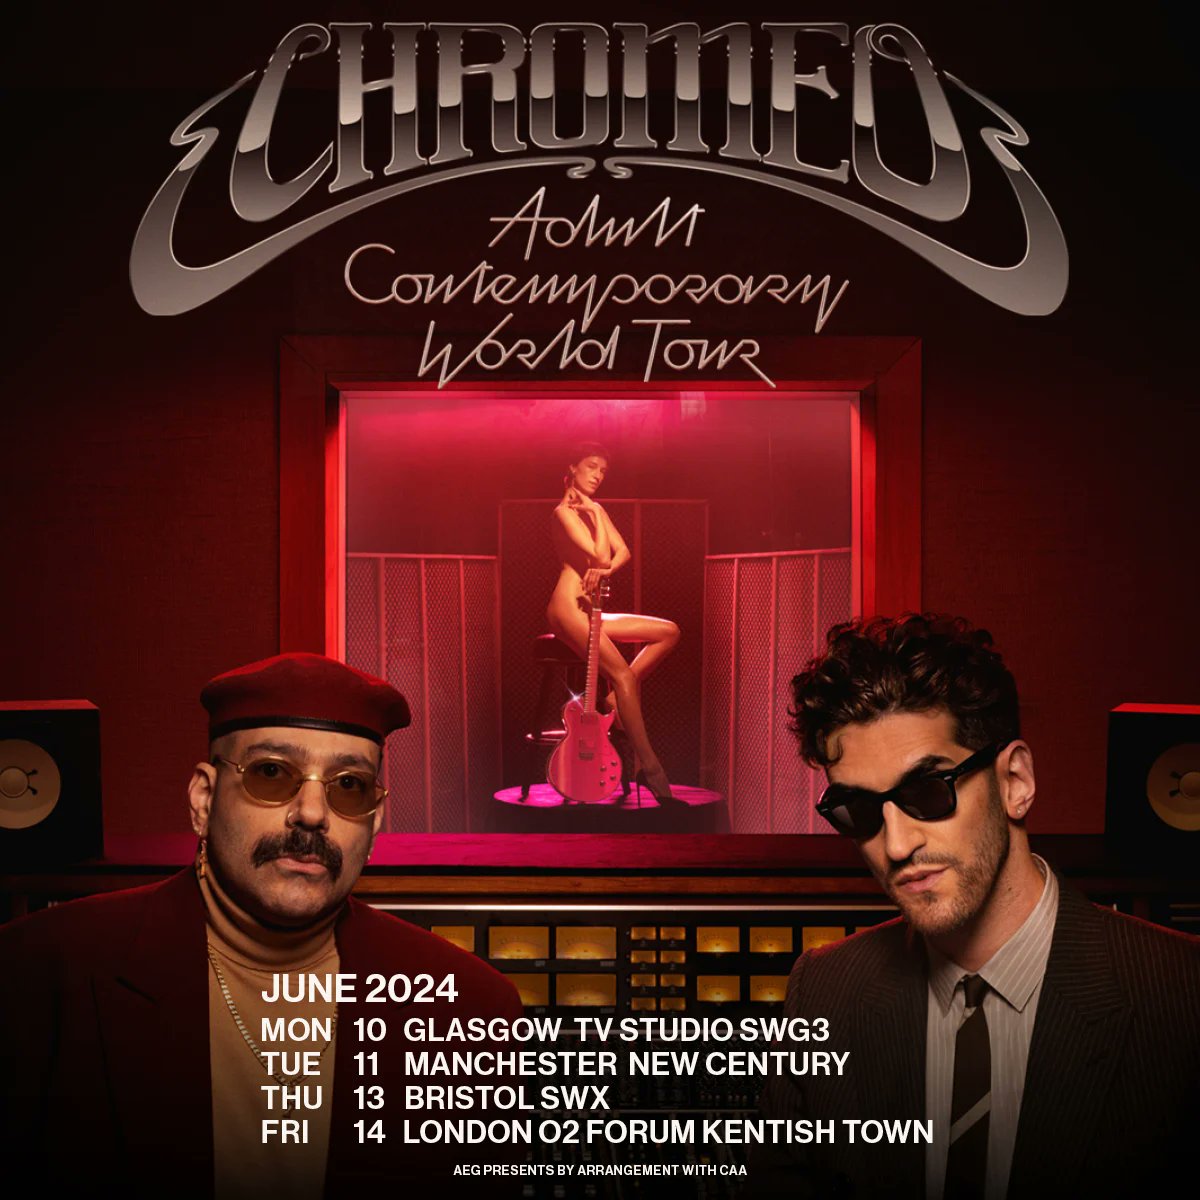 Chromeo - Adult Contemporary World Tour en Manchester New Century Hall Tickets